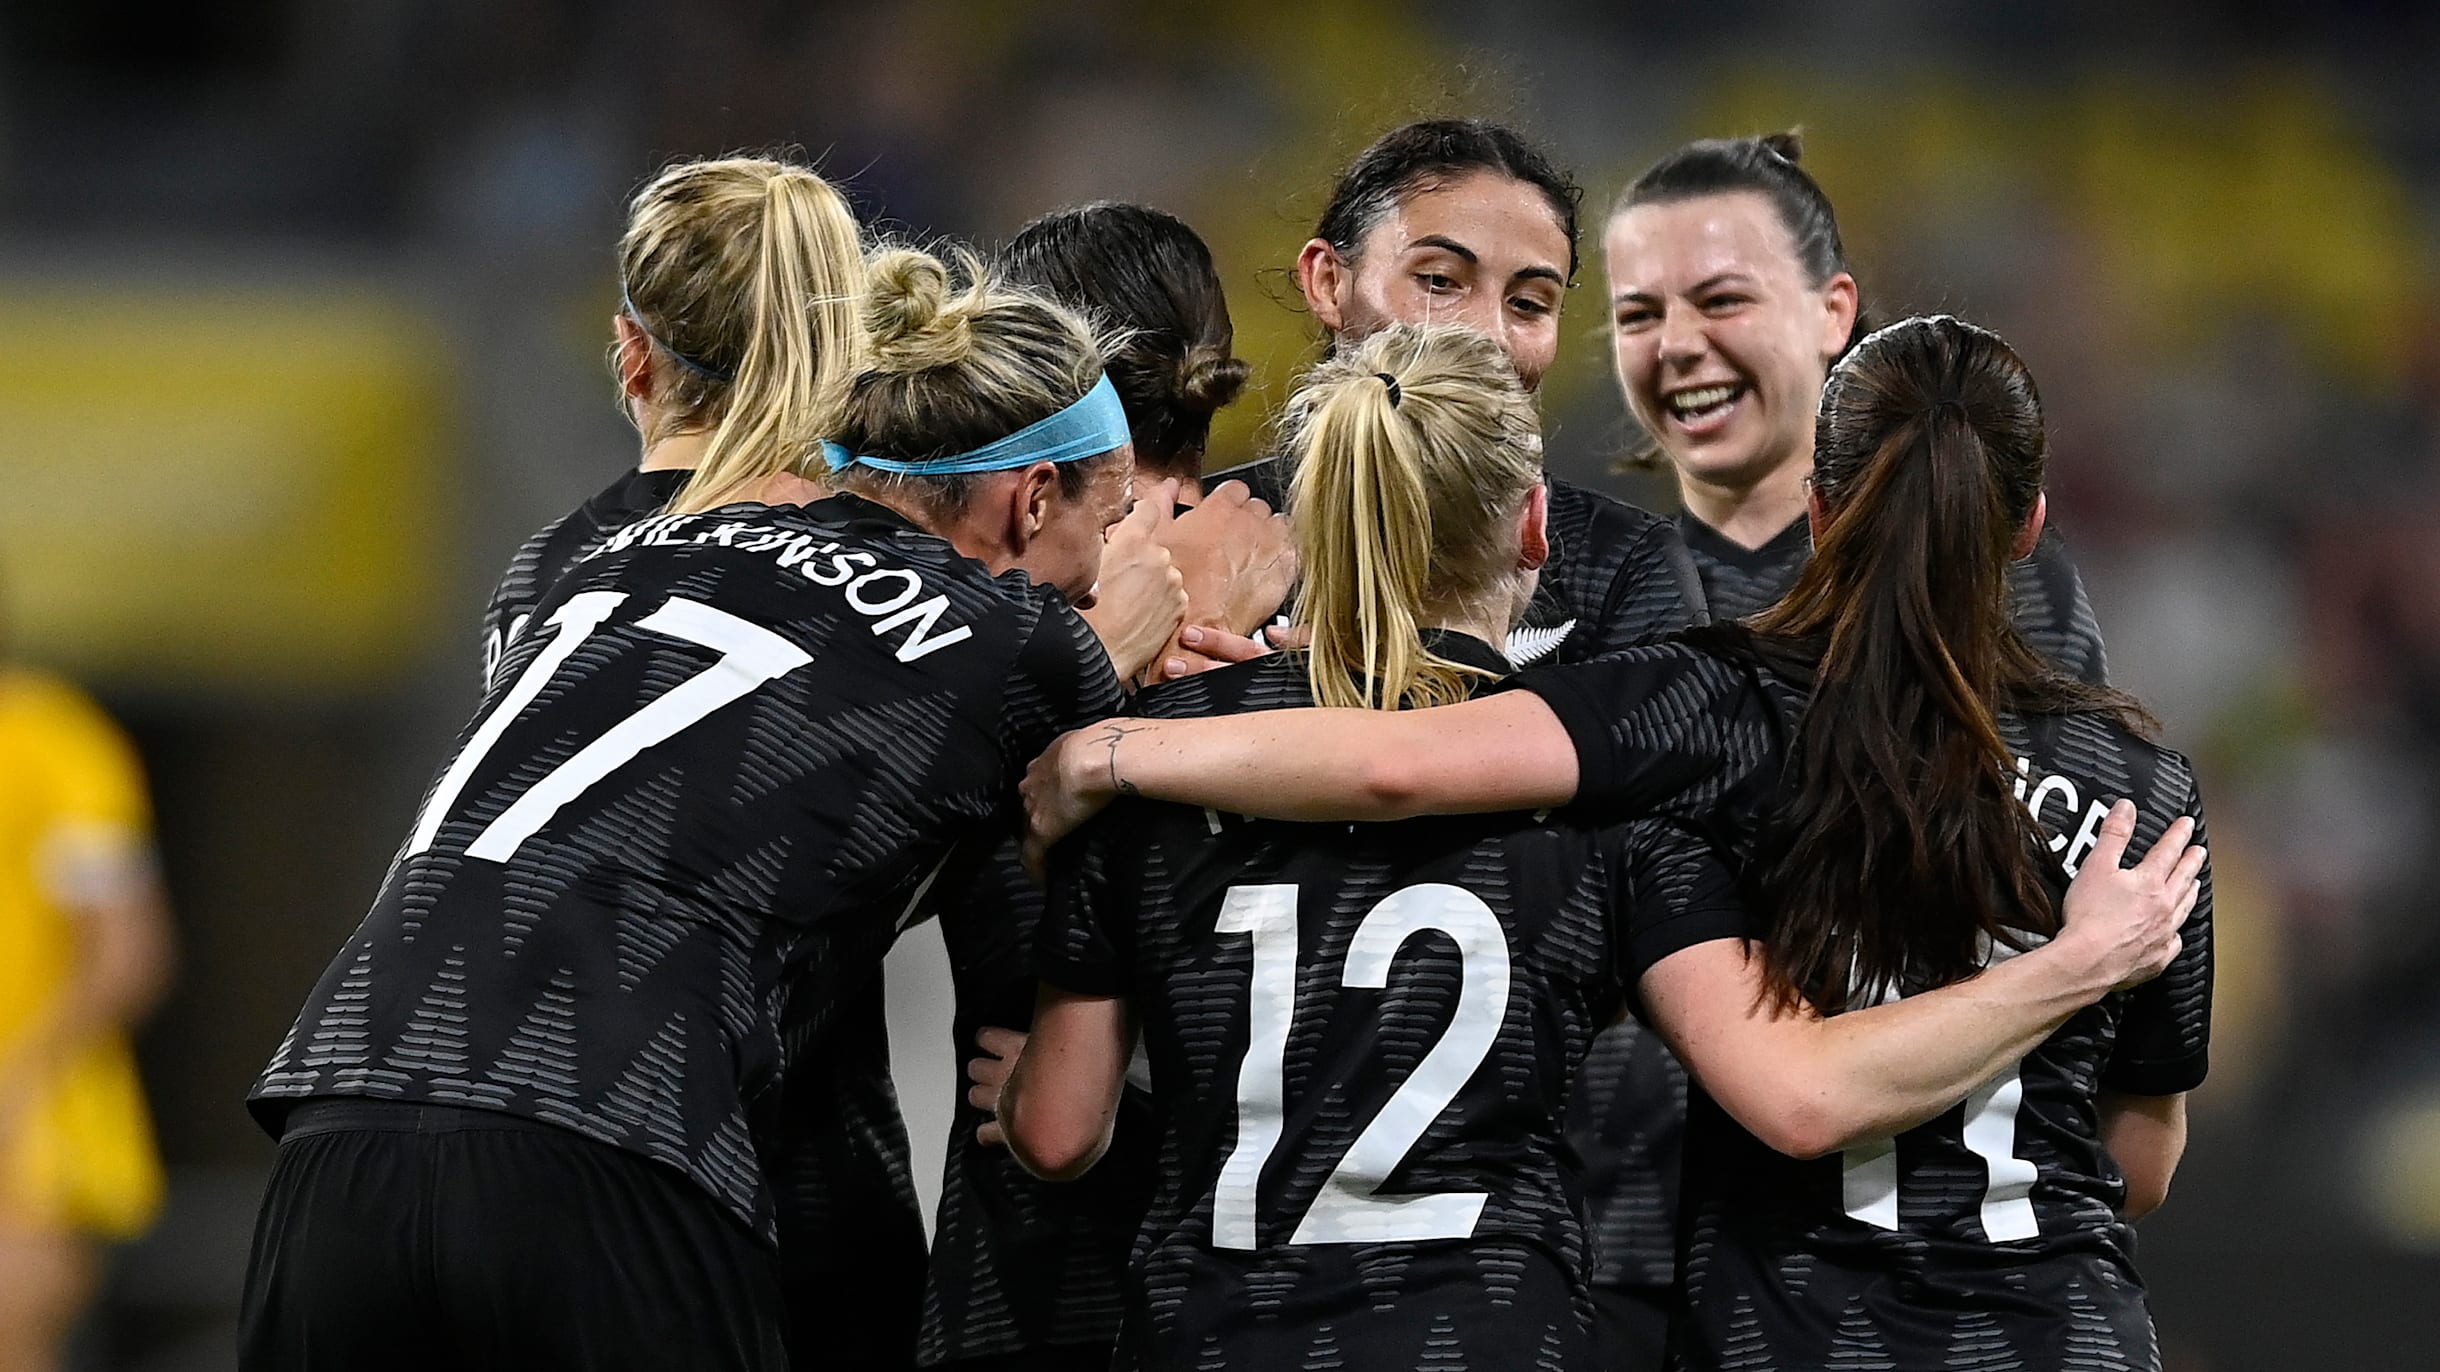 Your guide to tonight's FIFA Women's World Cup draw from the Aotea